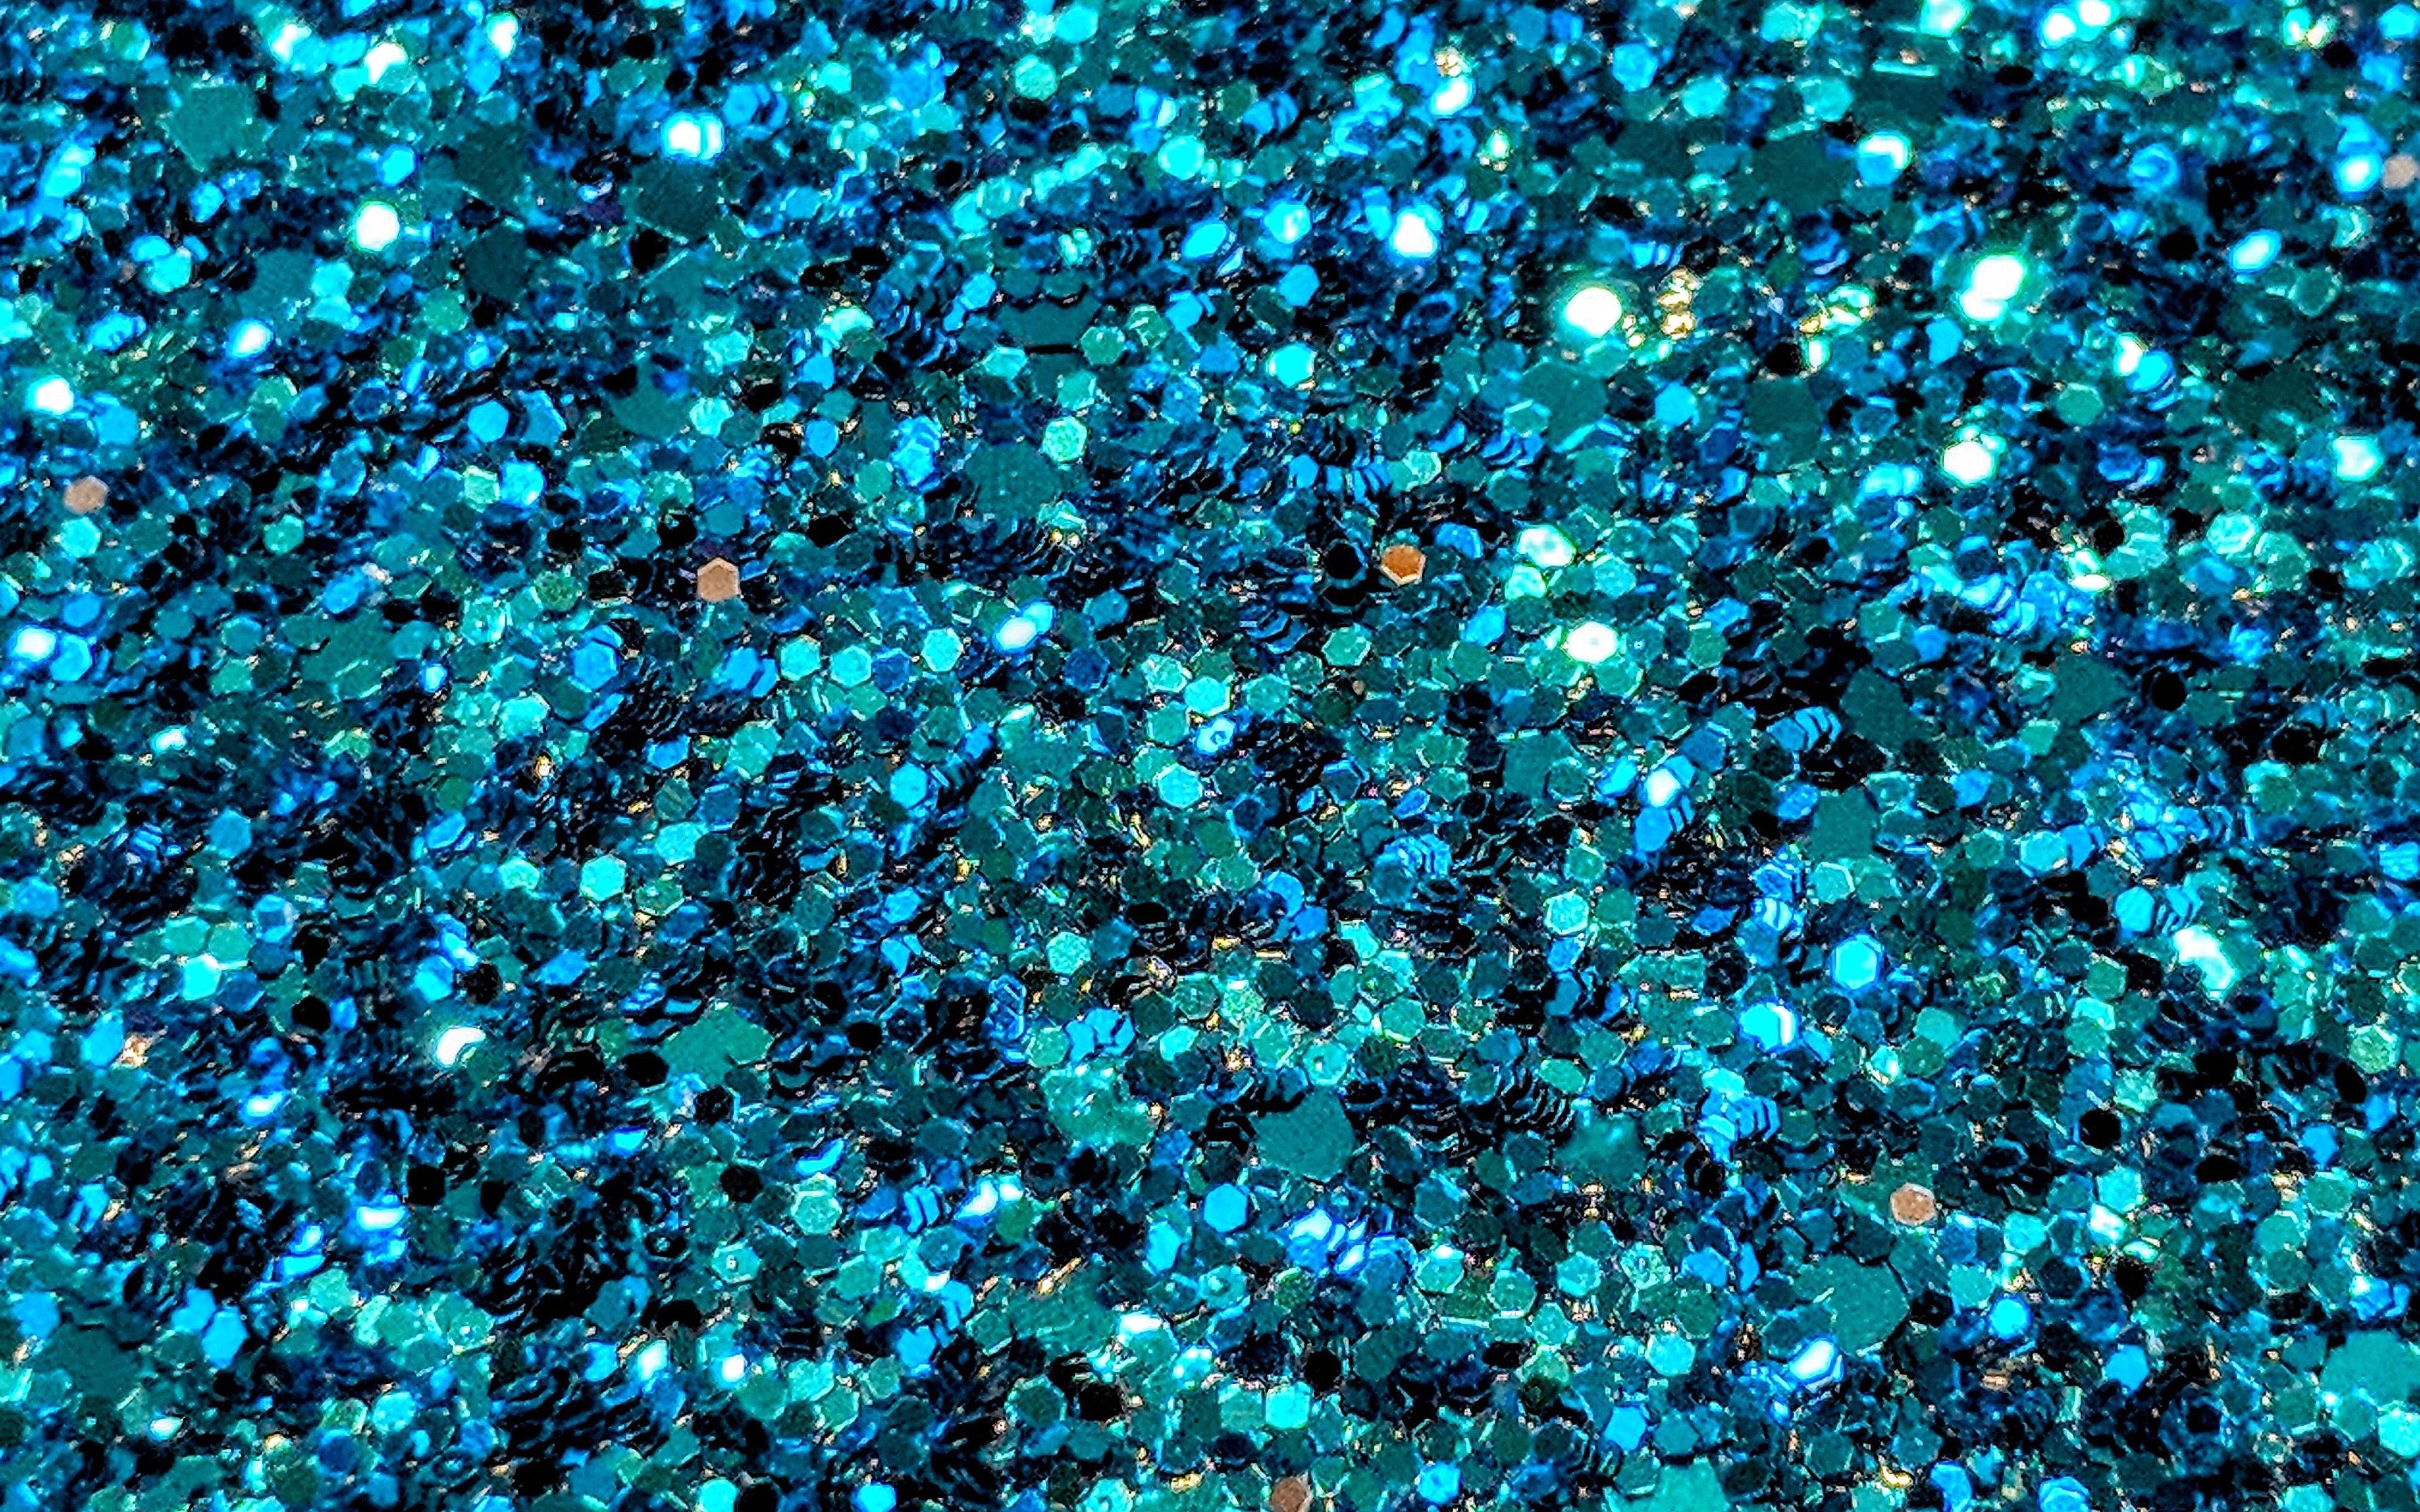 Download wallpaper blue glitter texture, 4k, blue background, turquoise glitter pattern, glitter background for desktop with resolution 3840x2400. High Quality HD picture wallpaper